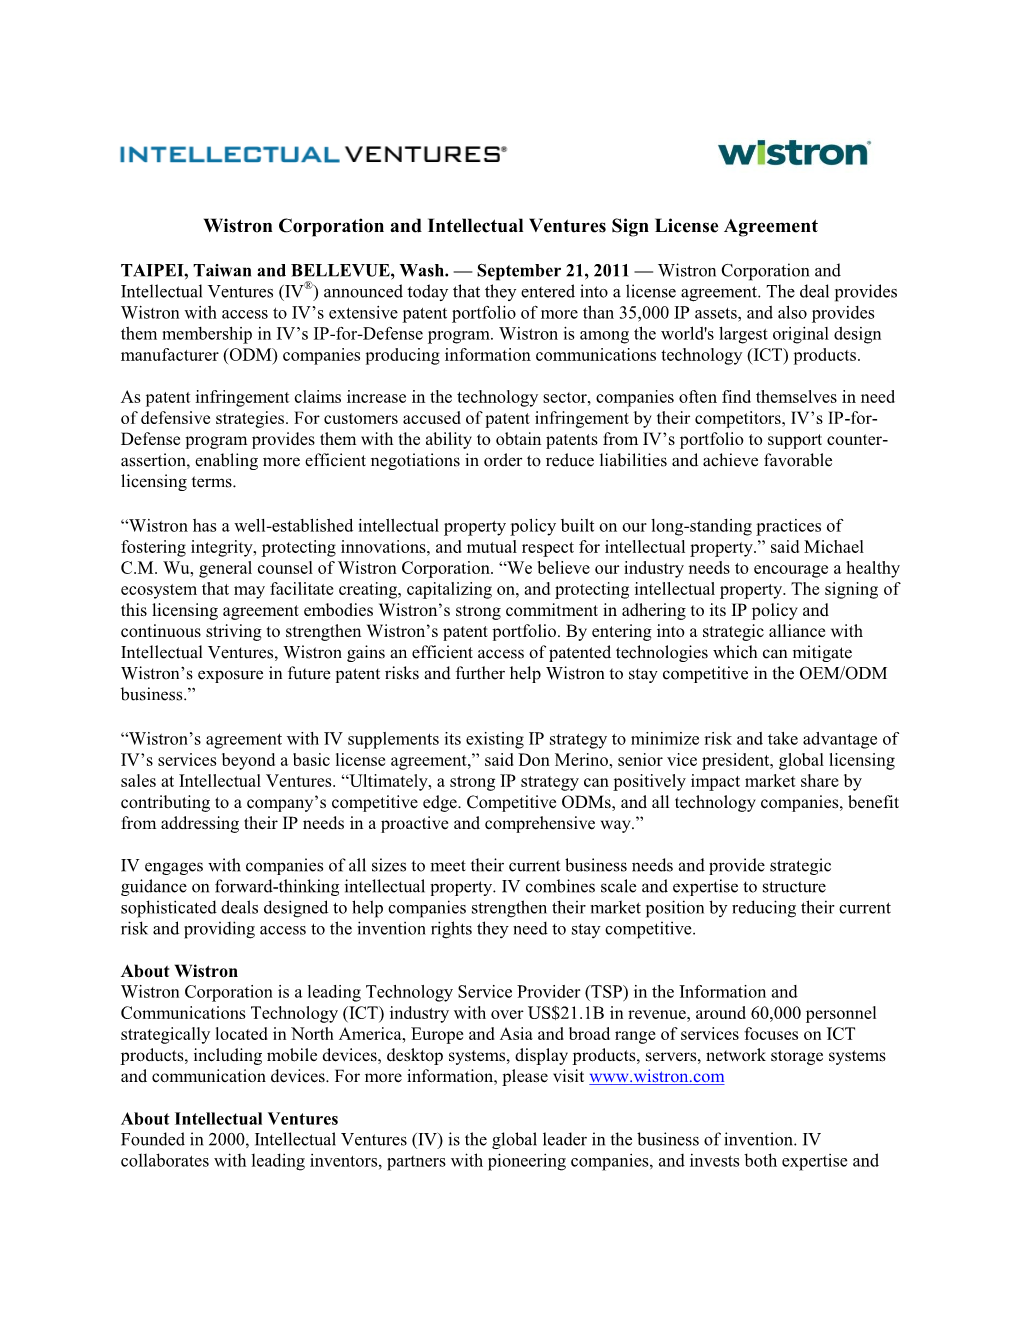 Wistron Corporation and Intellectual Ventures Sign License Agreement